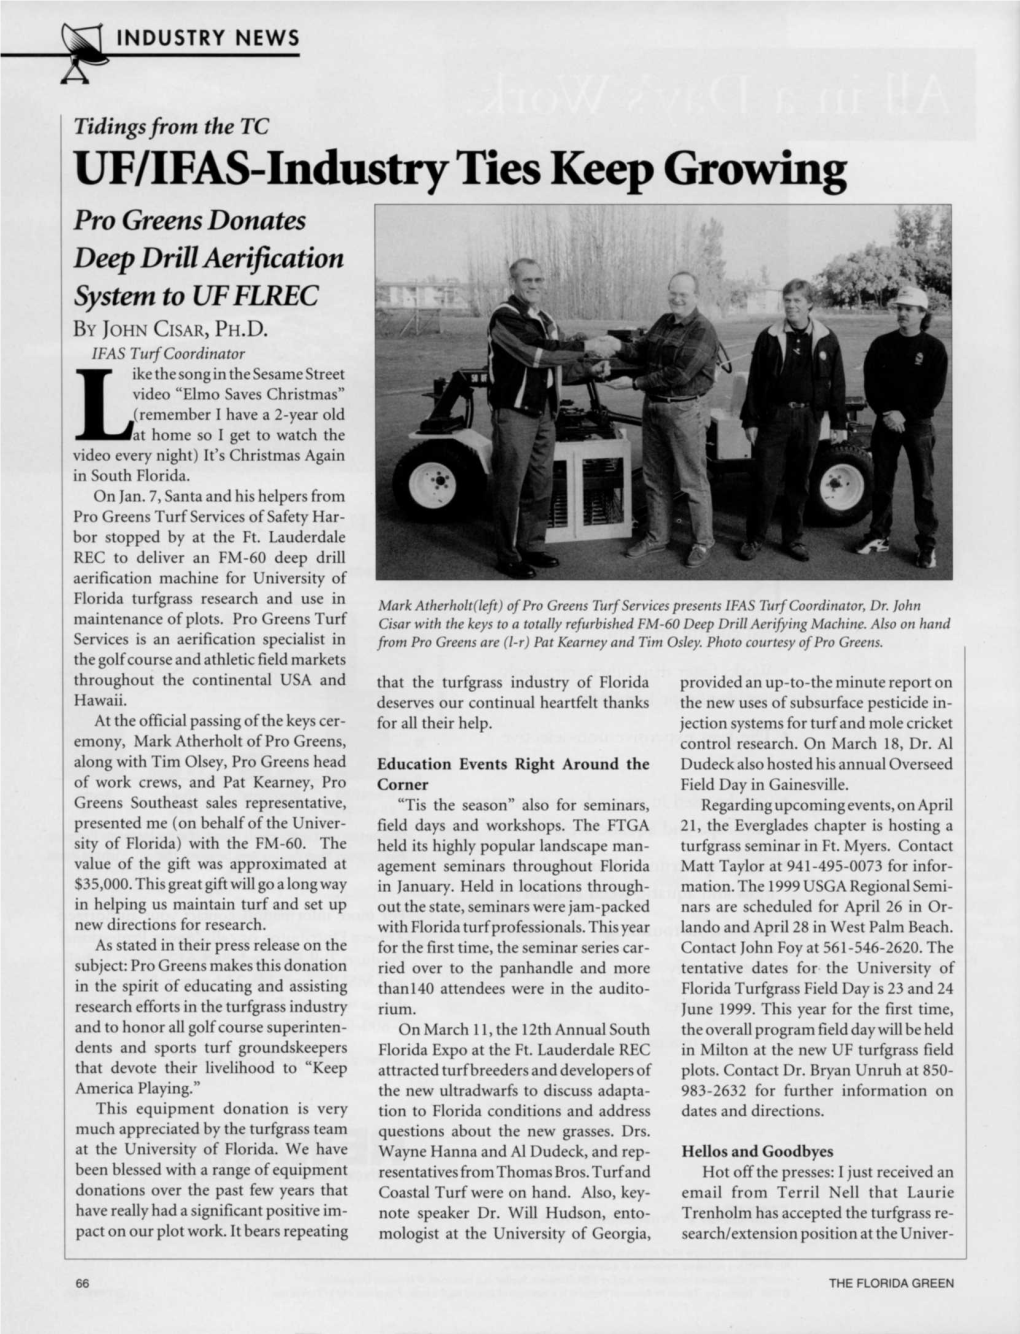 UF/IFAS-Industry Ties Keep Growing Pro Greens Donates Deep Drill Aerification System to UFFLREC by JOHN CISAR, PH.D